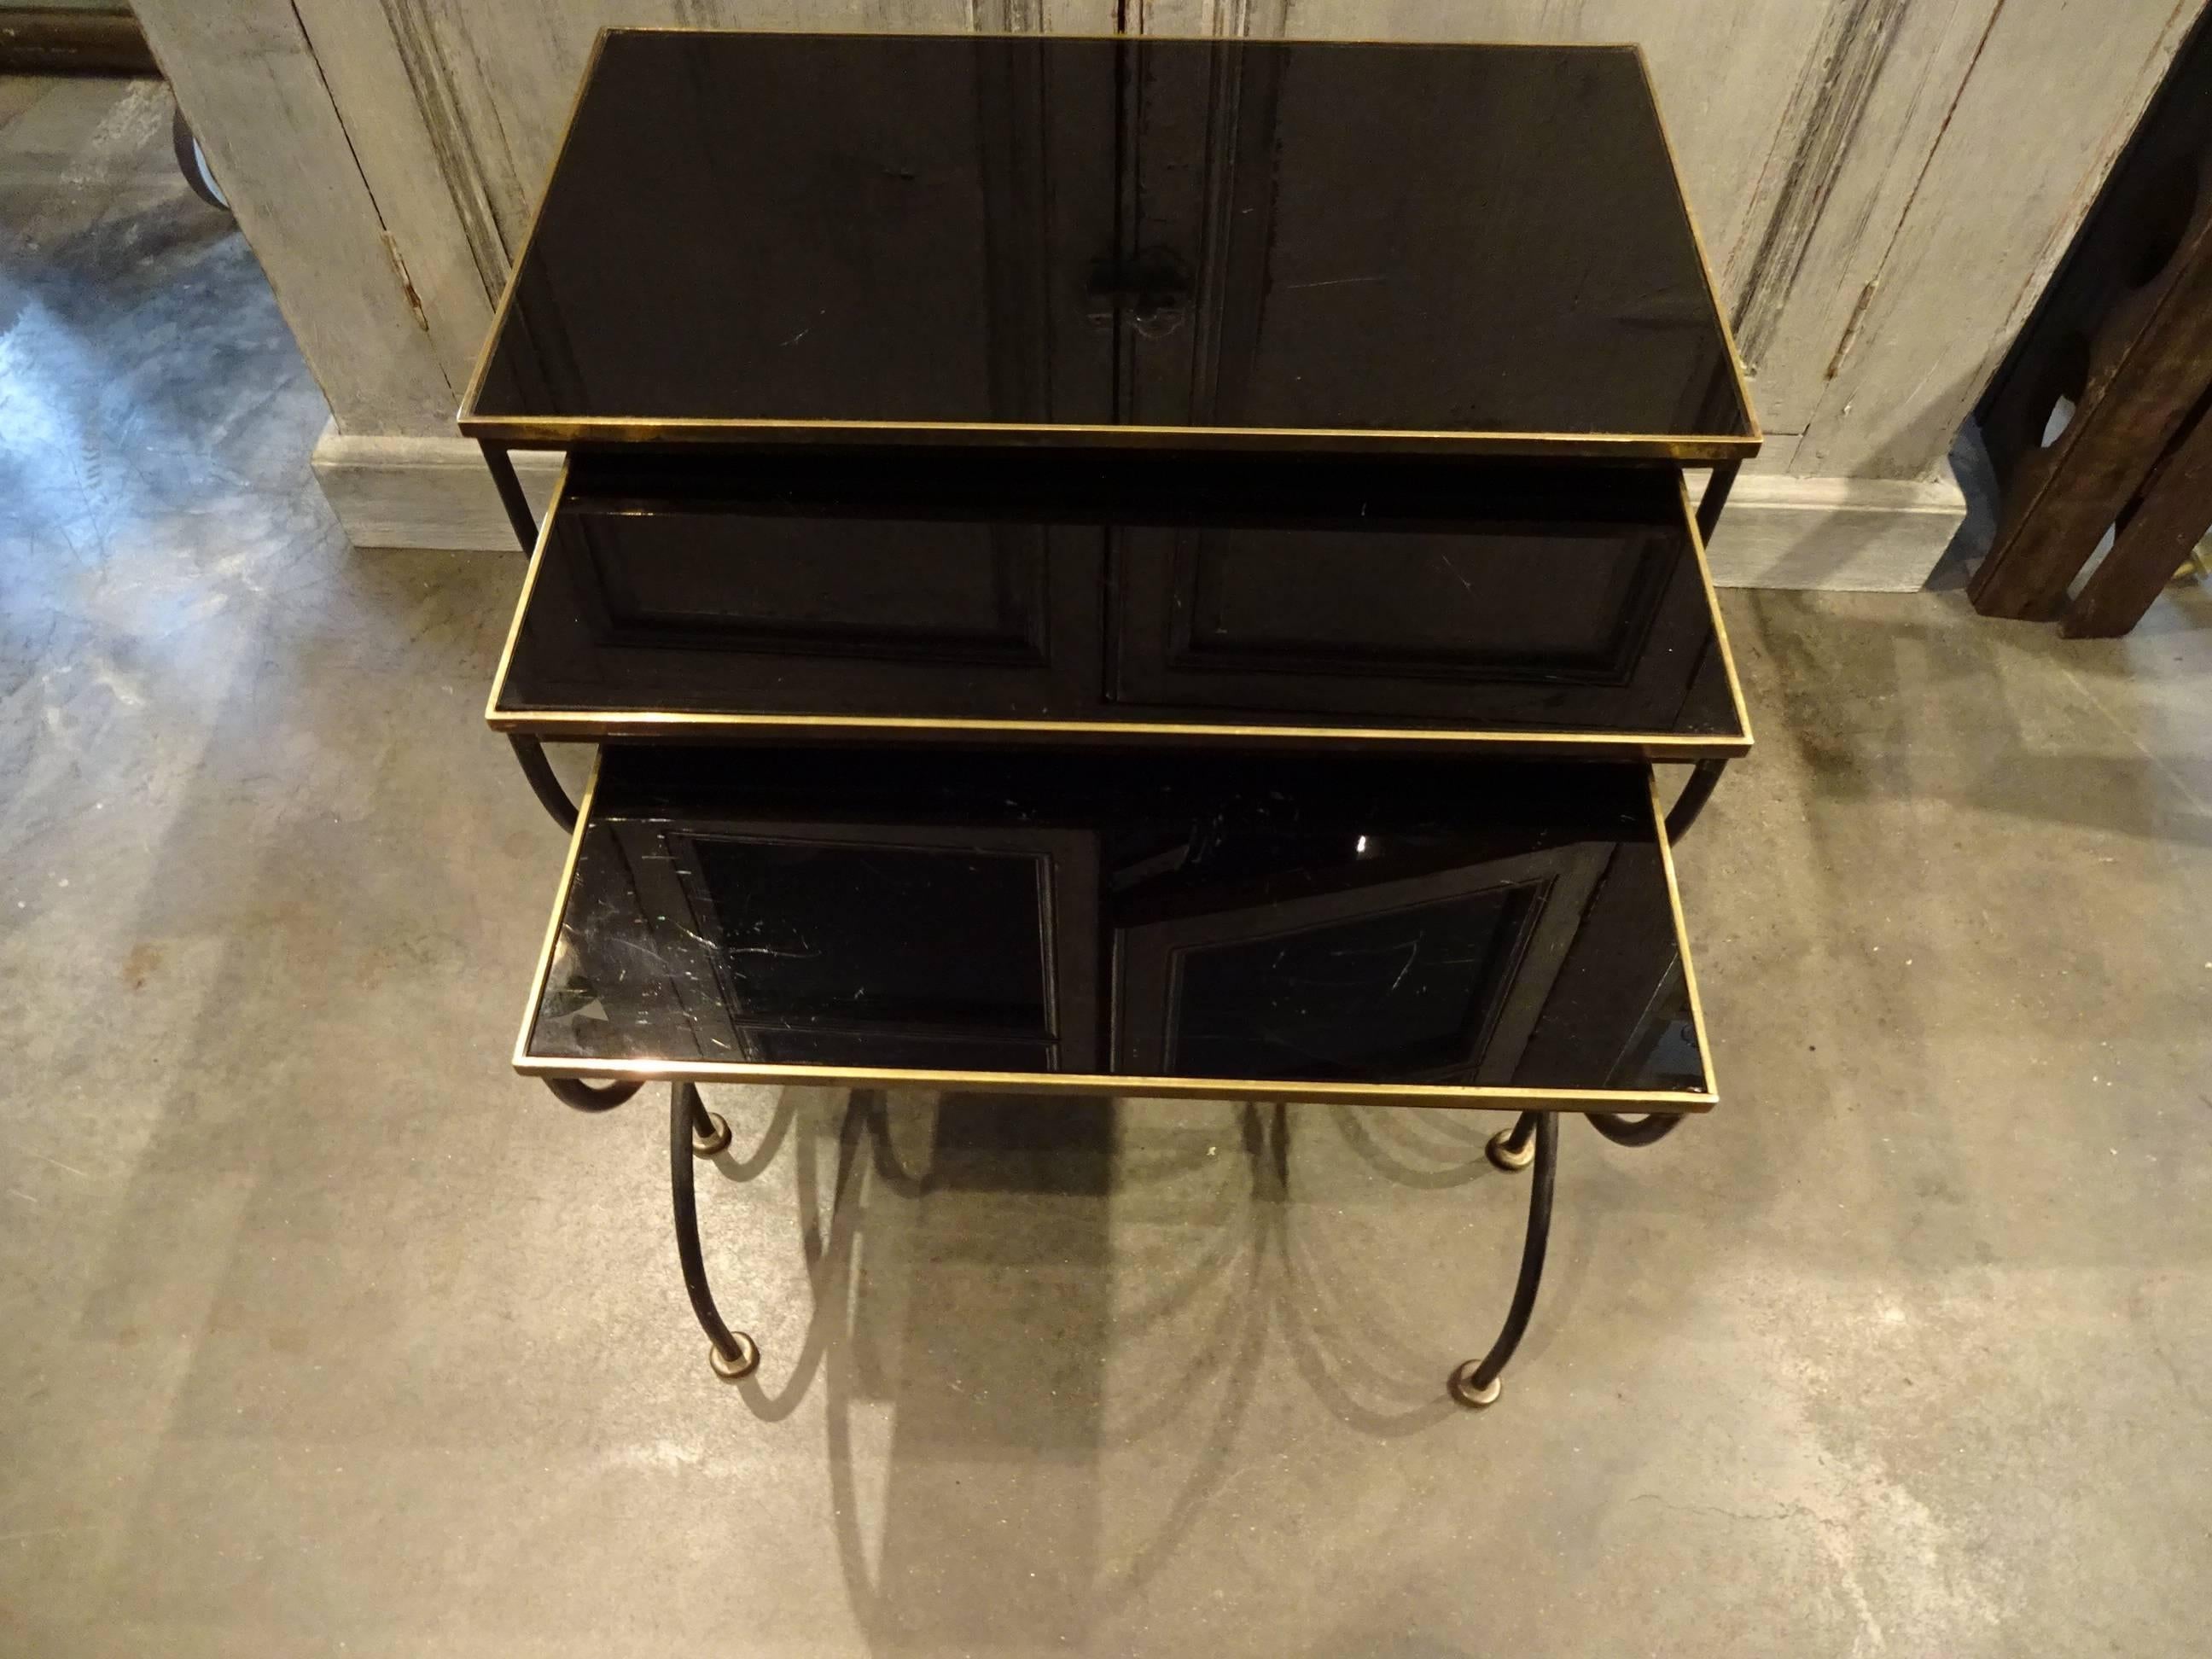 A set of three elegant French nesting tables. Brass frame, with black opaque glass surfaces. Lovely leg detailing. Would look fabulous whether coffee tables, bedside tables or side tables.